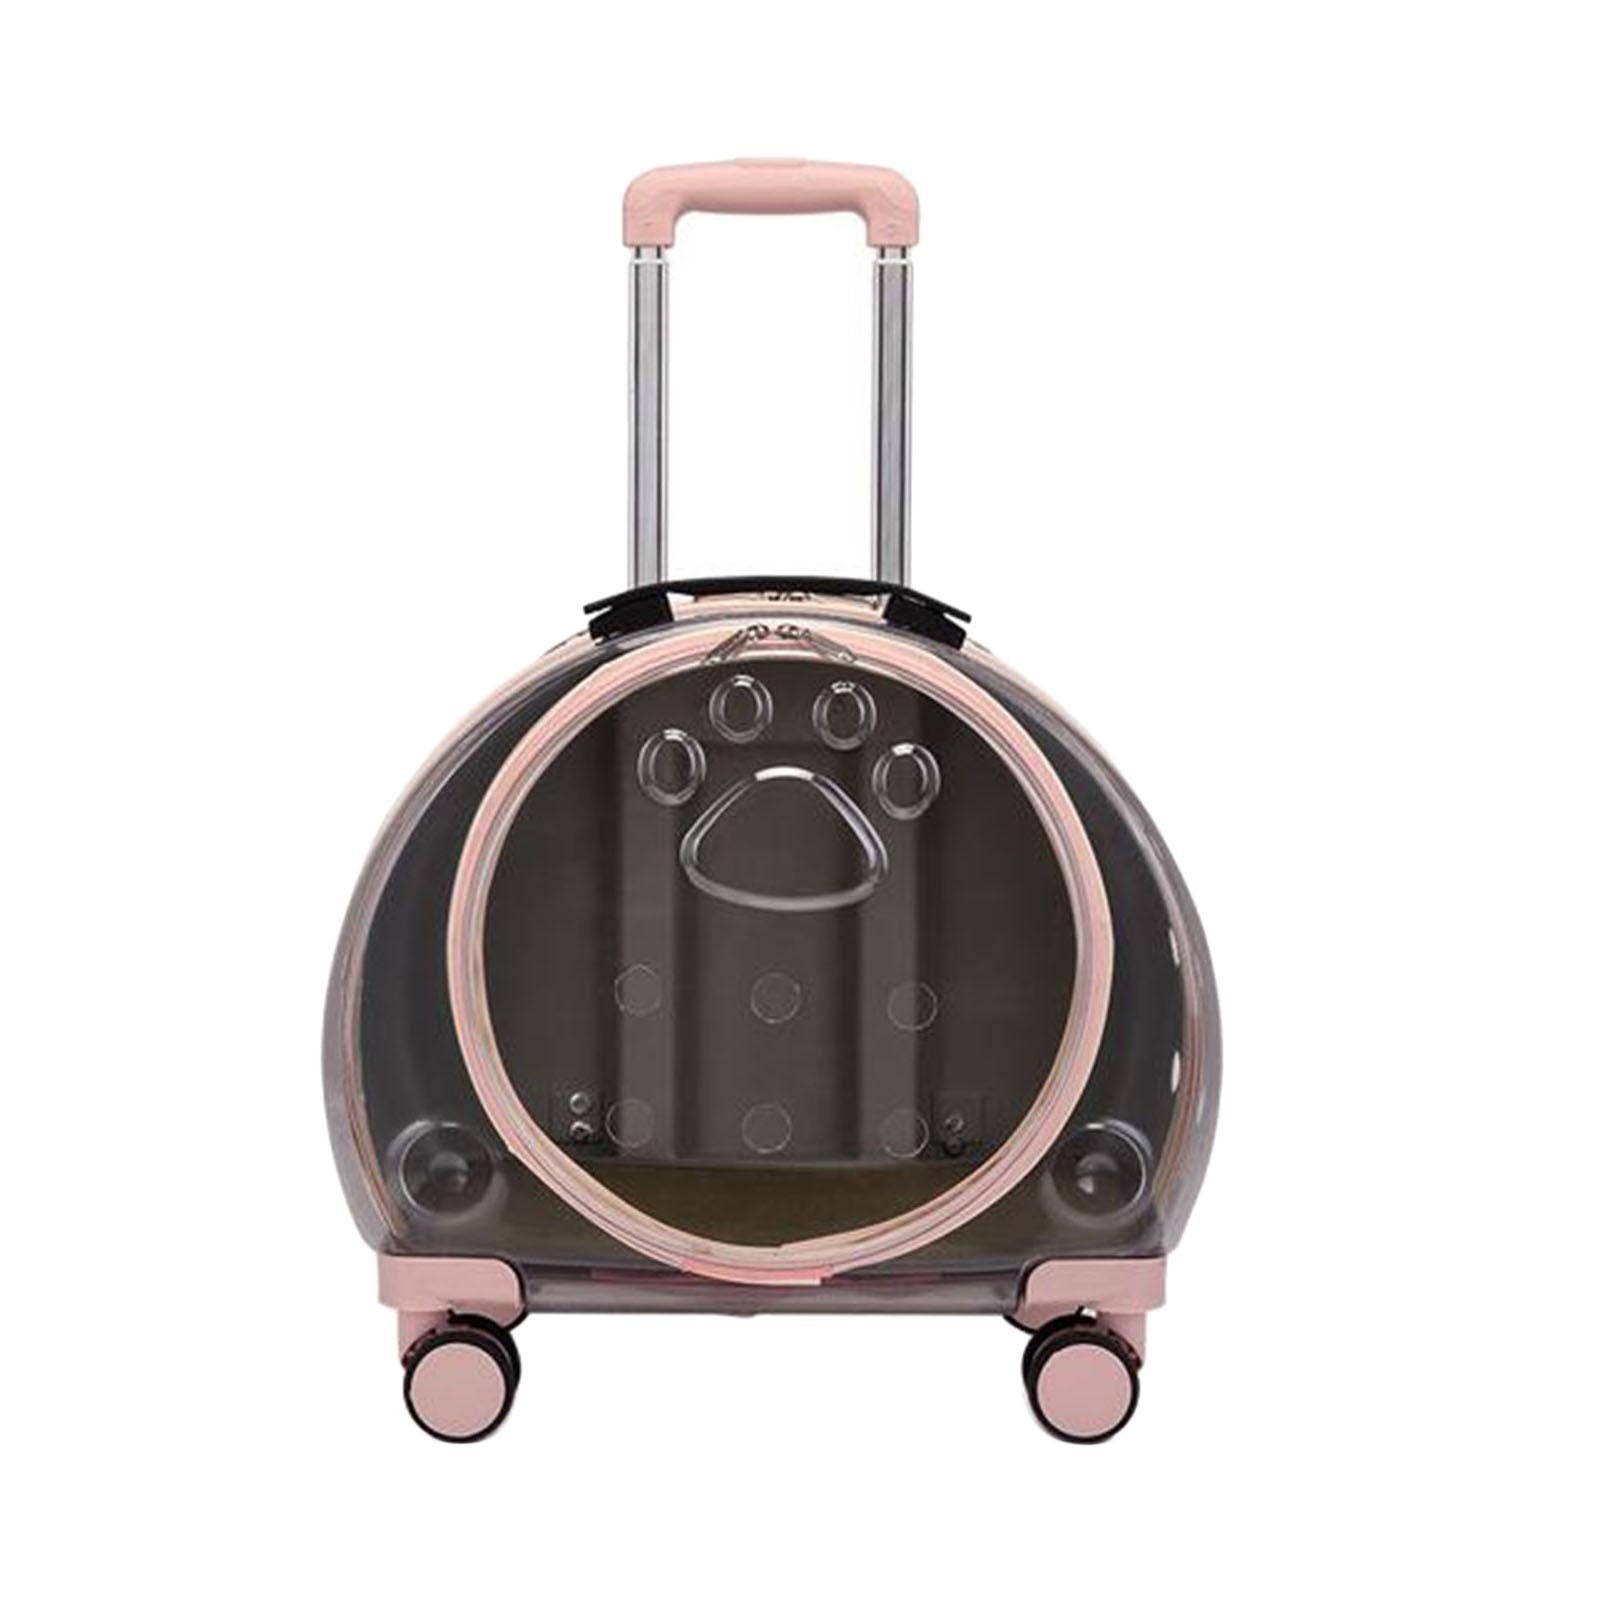 Cat Carrier Bag, Backpack Ventilated Holes Suitcase Adjustable Shoulder Strap Luggage Pet Trolley Case for Hiking Short Trips Outgoing Kitty Translucent Pink